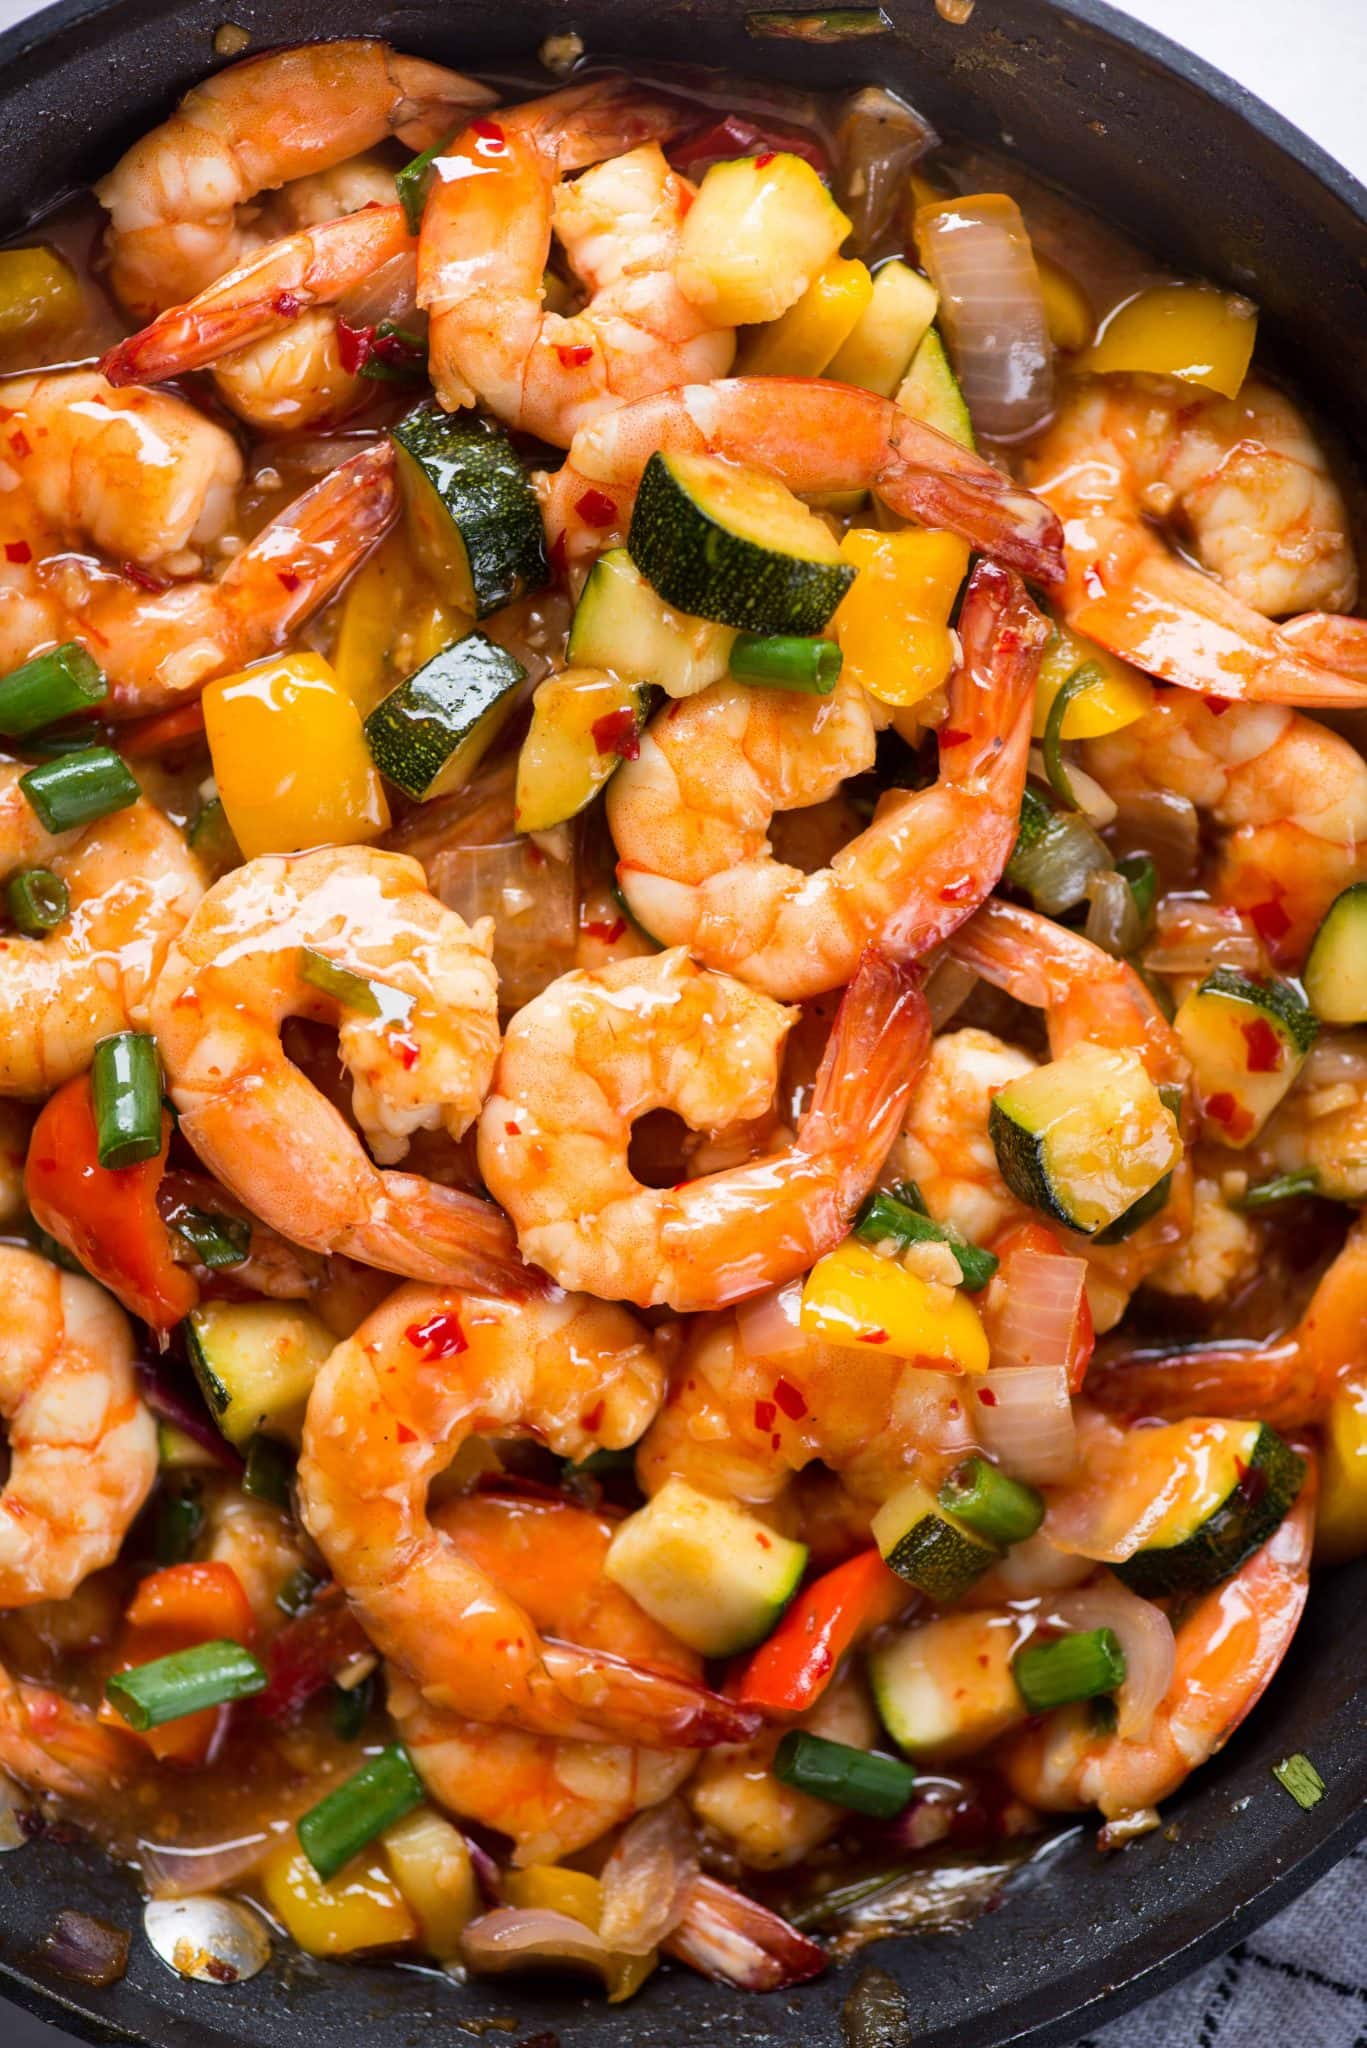 Sweet Chili Shrimp Stir Fry - The flavours of kitchen